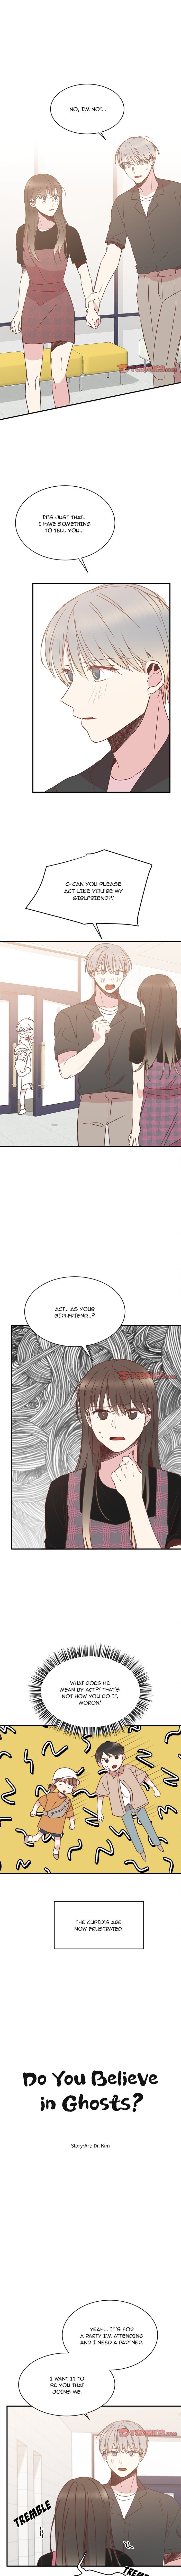 Do You Believe in Ghosts? Chapter 34 - Page 1